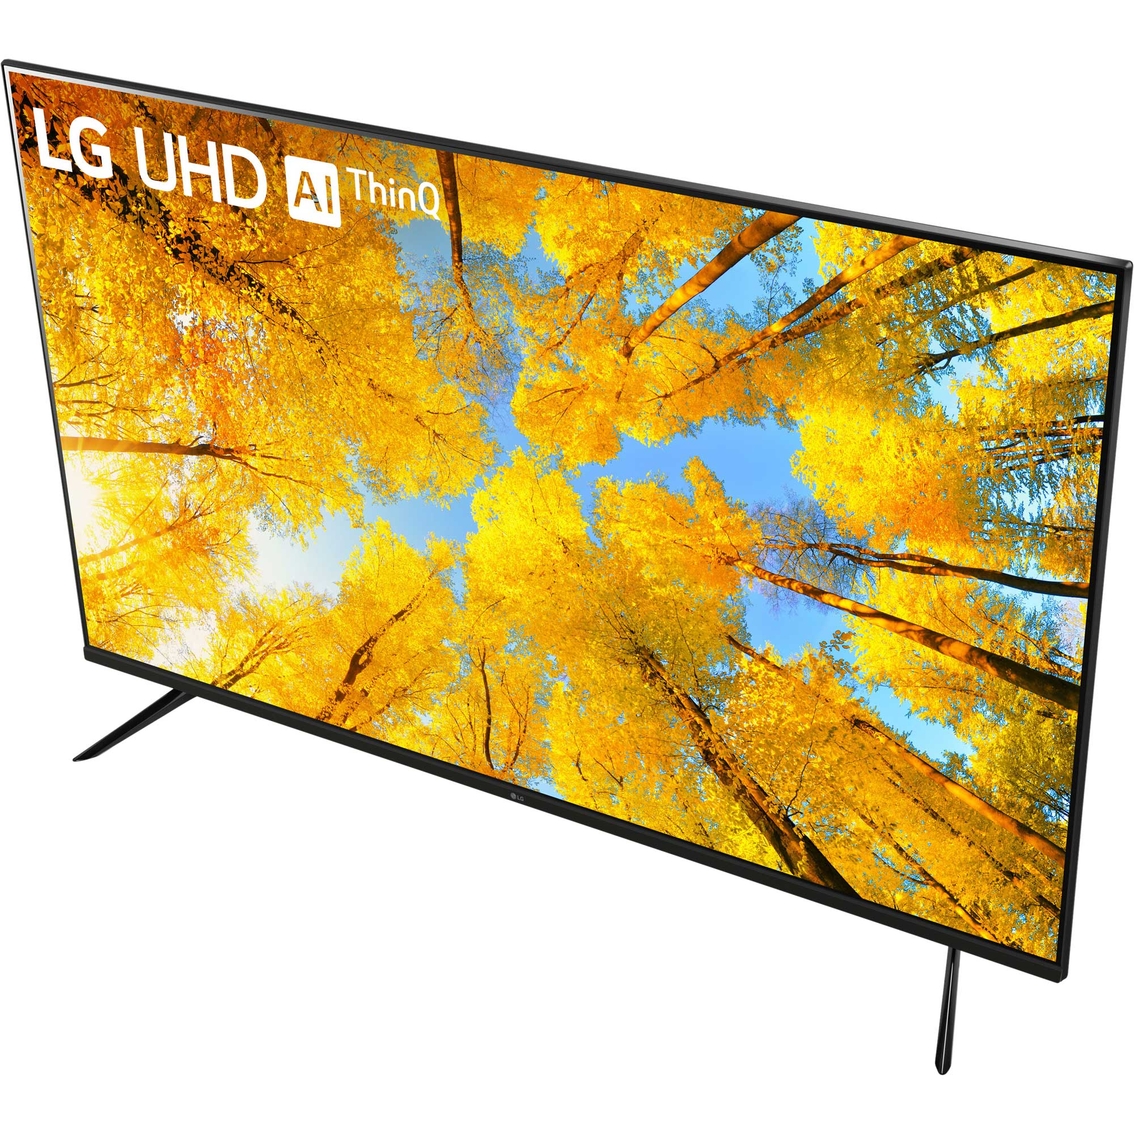 LG 50 in. 4K HDR Smart TV with AI ThinQ 50UQ7570PUJ - Image 6 of 10